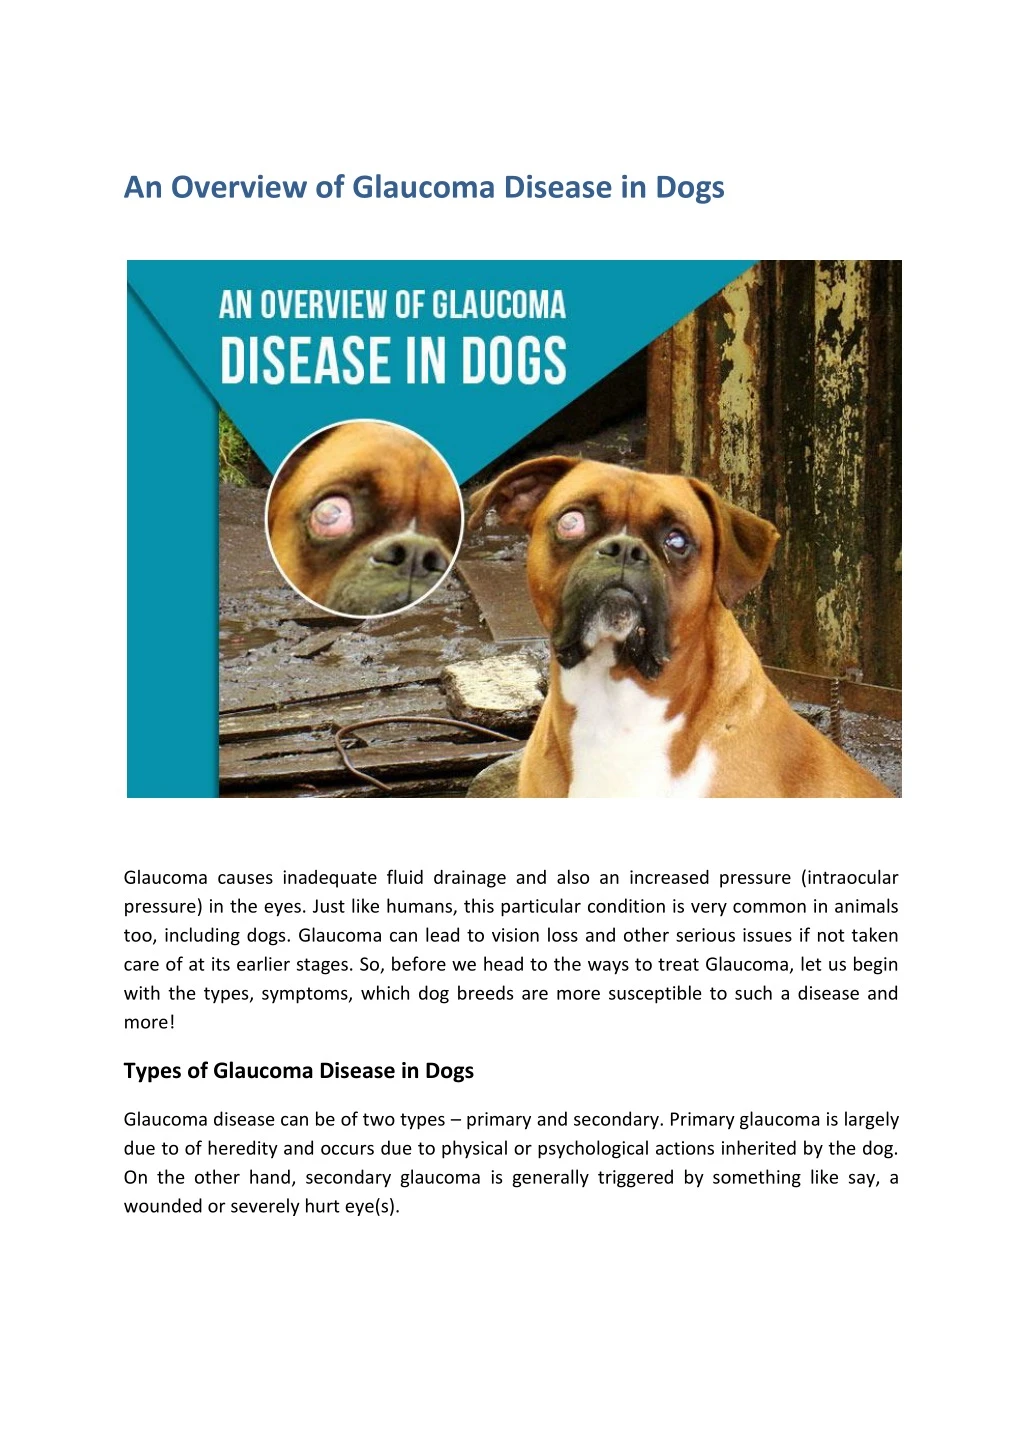 an overview of glaucoma disease in dogs